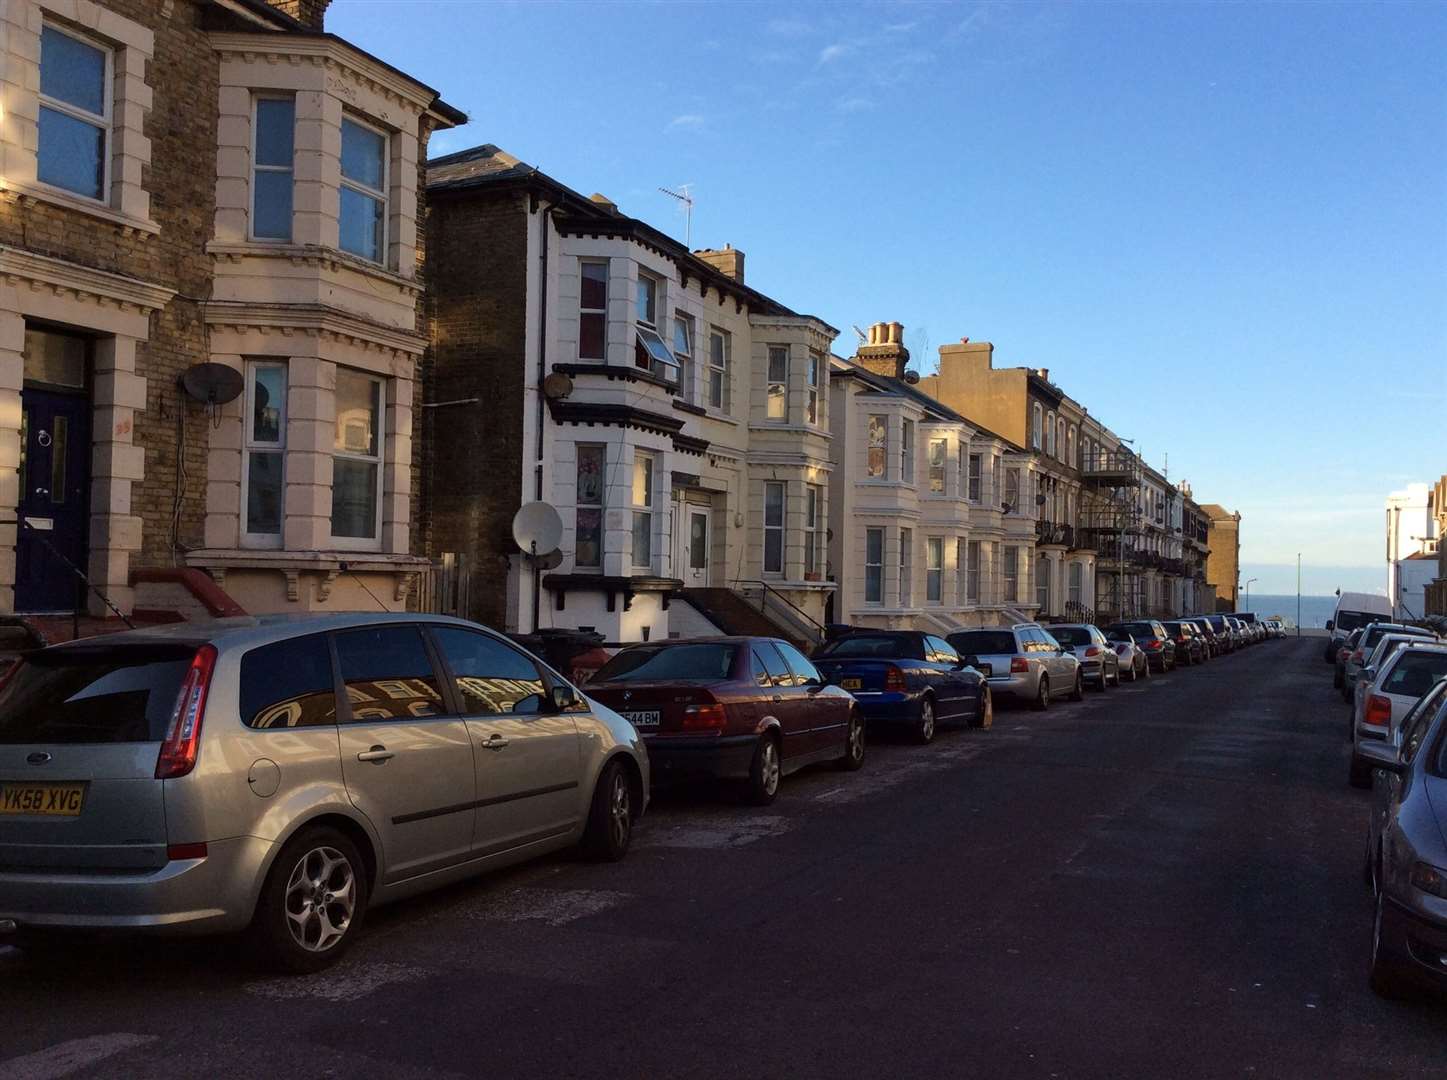 Kent Police were called to Athelstan Road in Cliftonville, near Margate, after reports of a person armed with a machete